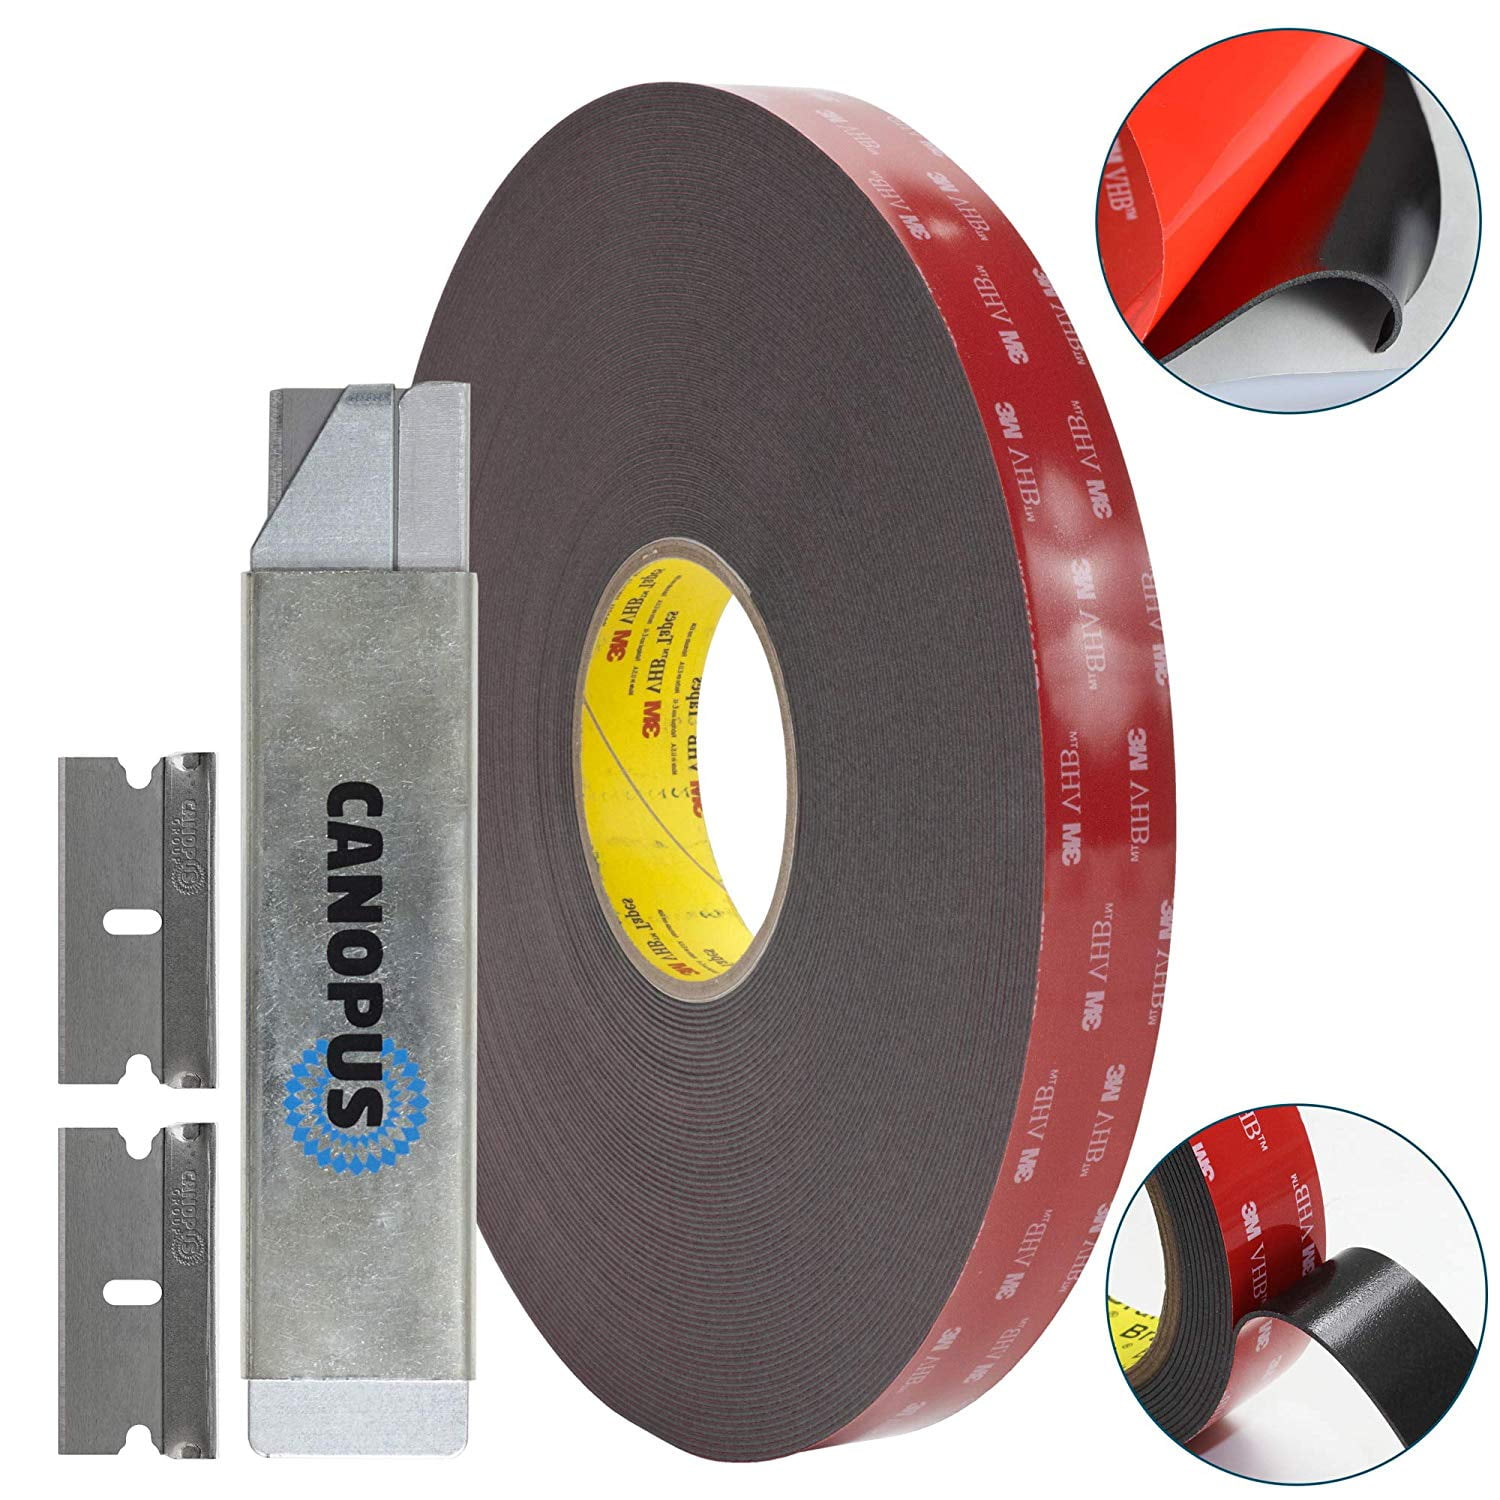 3M VHB DOUBLE SIDED TAPE ROLL VERY STRONG SELF ADHESIVE STICKY TAPE CLEAR & GREY 